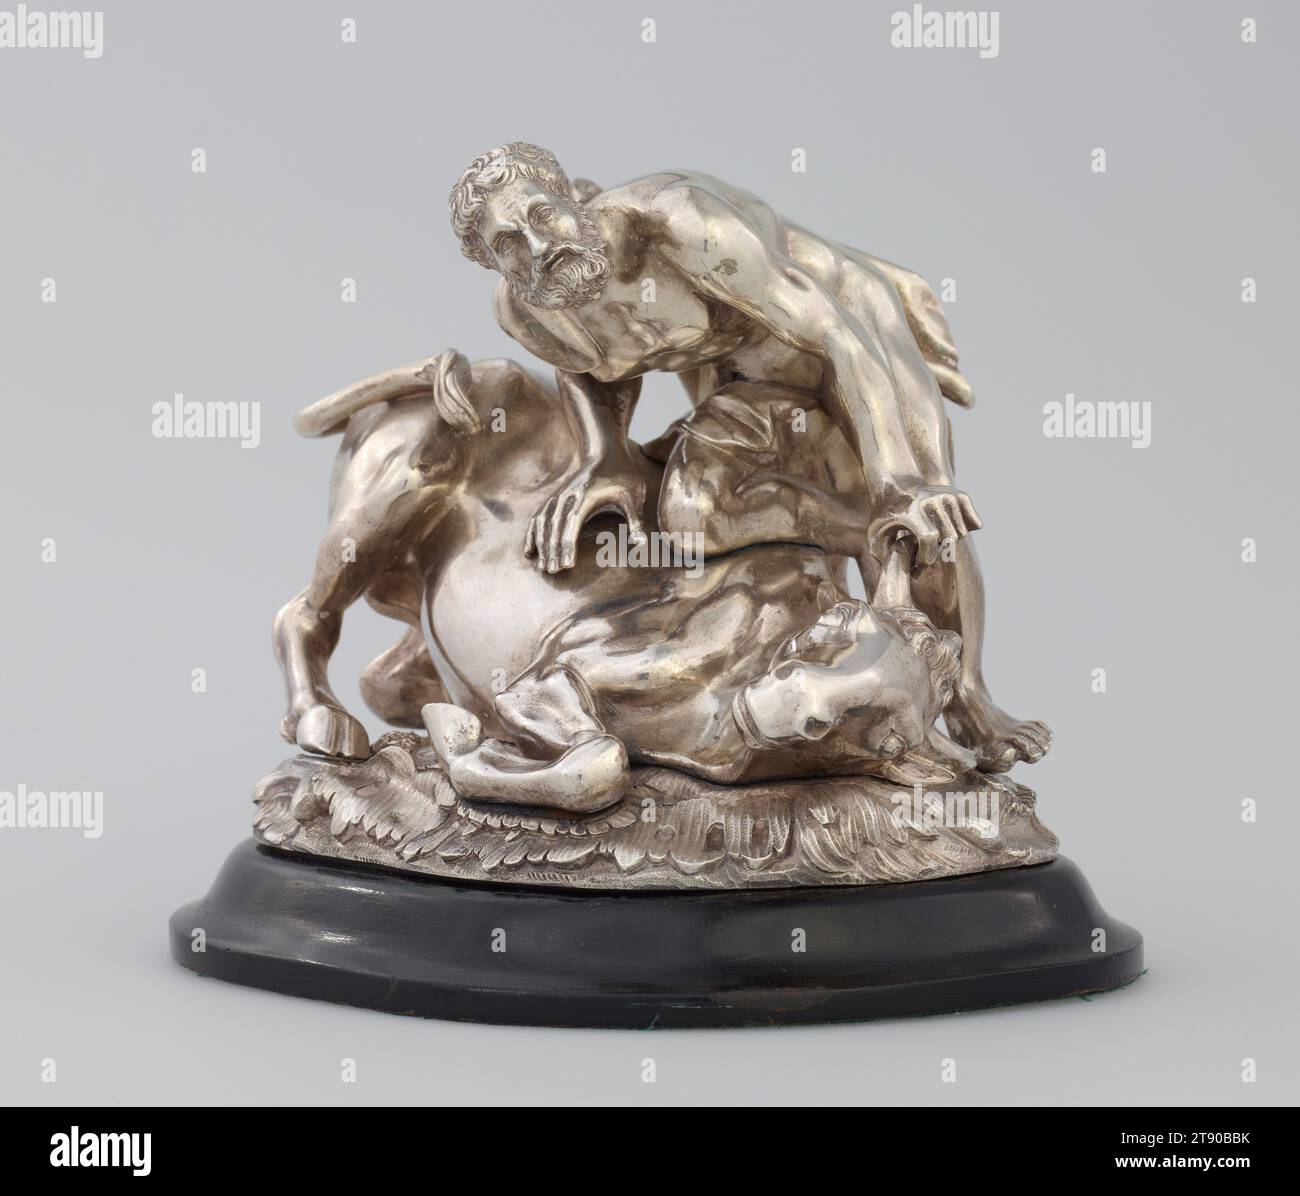 Hercules and the Bull, c. 1820, 5 9/16 x 7 x 5 1/16 in. (14.13 x 17.78 x 12.86 cm), Silver, England, 19th century, This small sculpture of Hercules' seventh Labour, the capturing of the Cretan Bull, was made by an unknown English silversmith in the early 19th century for Prince Augustus Frederick, Duke of Sussex (1773-1843). The only further known cast of this model is kept by Her Majesty the Queen at Buckingham Palace. Originally the silver sculpture would have served as an ornament for the dining table - a particularly appropriate subject whenever beef was served Stock Photo